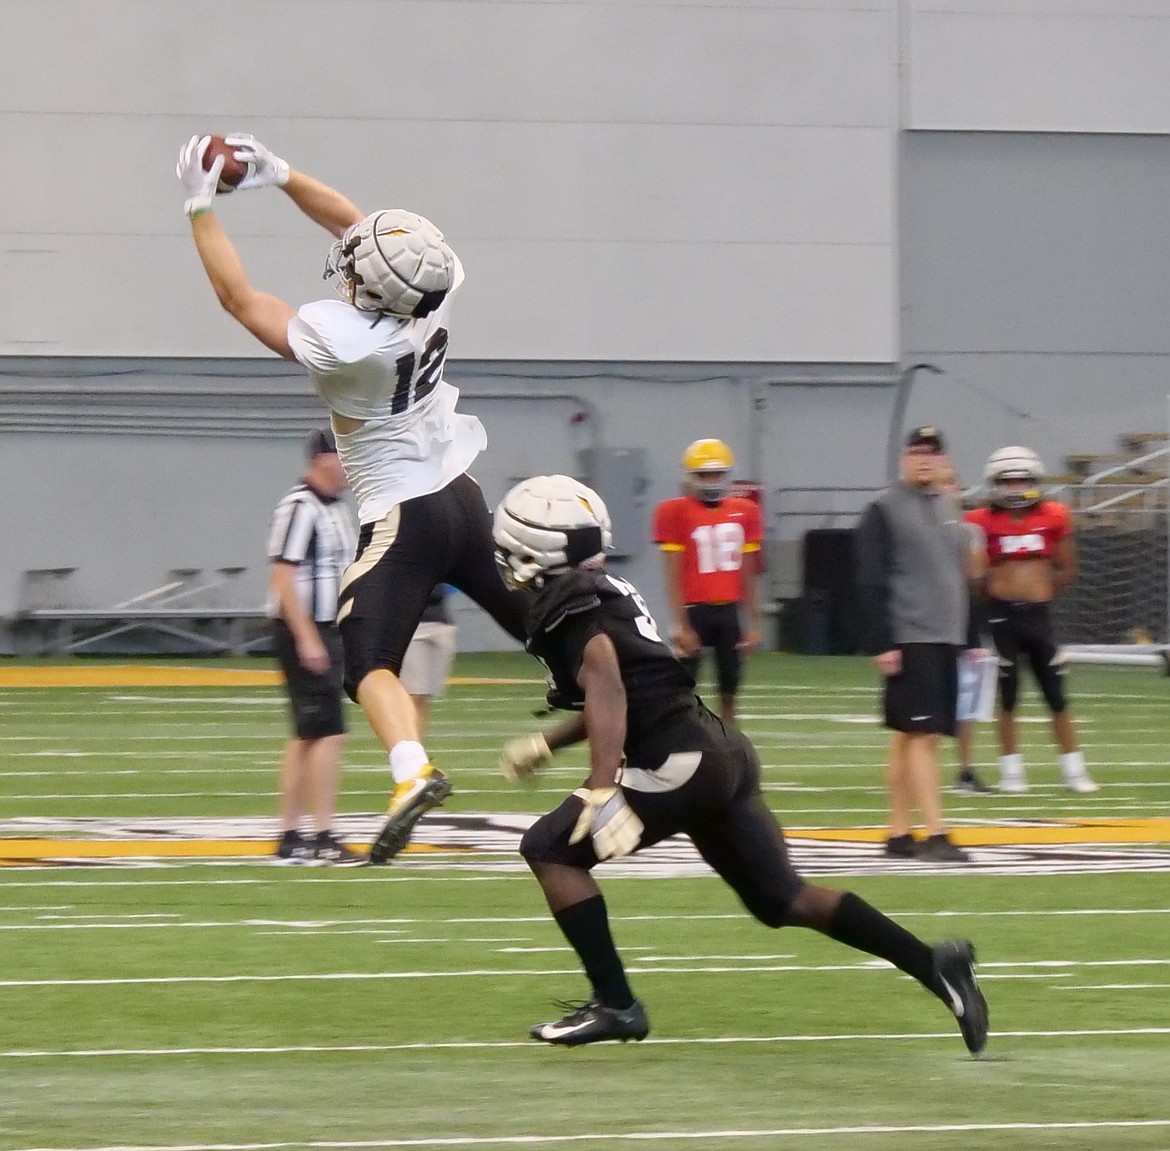 Photo courtesy Idaho Athletics
Connor Whitney (12) snags a pass during the Idaho Vandals' football scrimmage Saturday at the Kibbie Dome in Moscow.